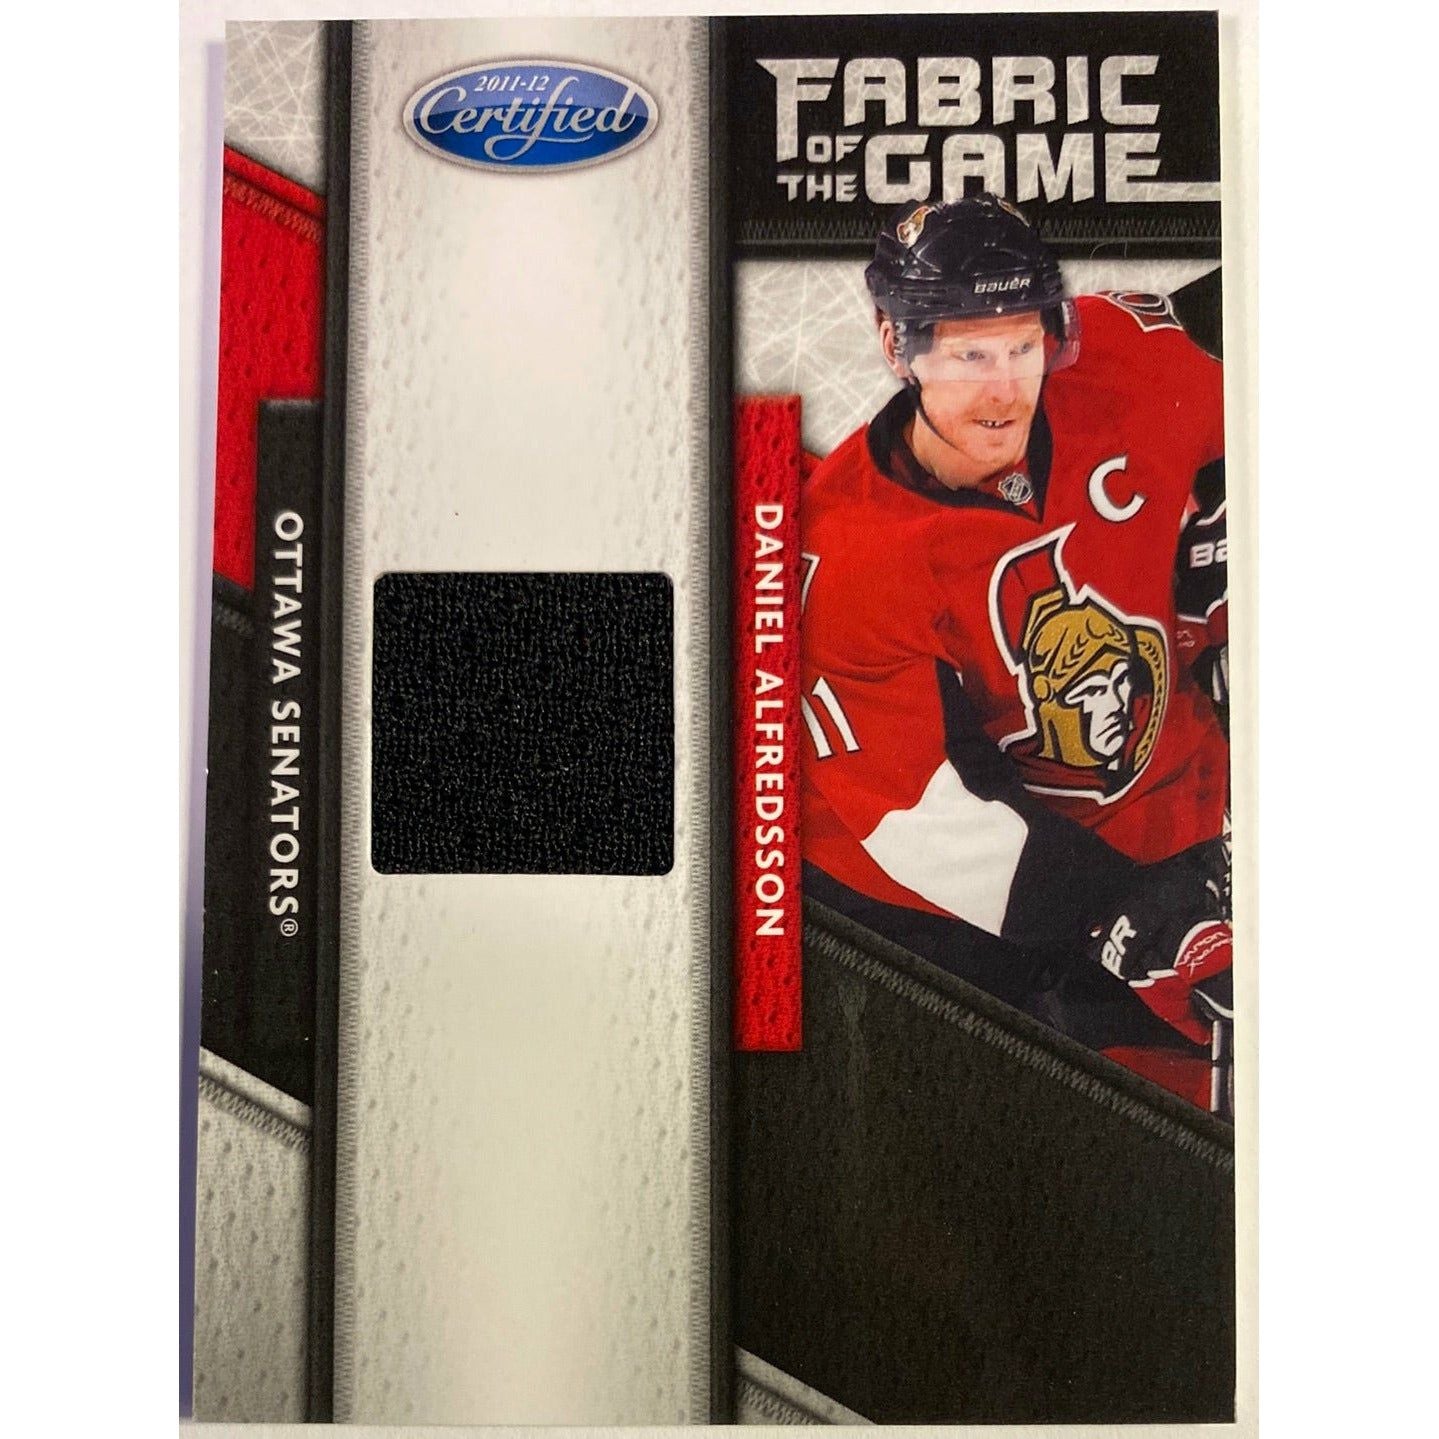  2011-12 Panini Certified Daniel Alfredsson Fabric of the Game /399  Local Legends Cards & Collectibles